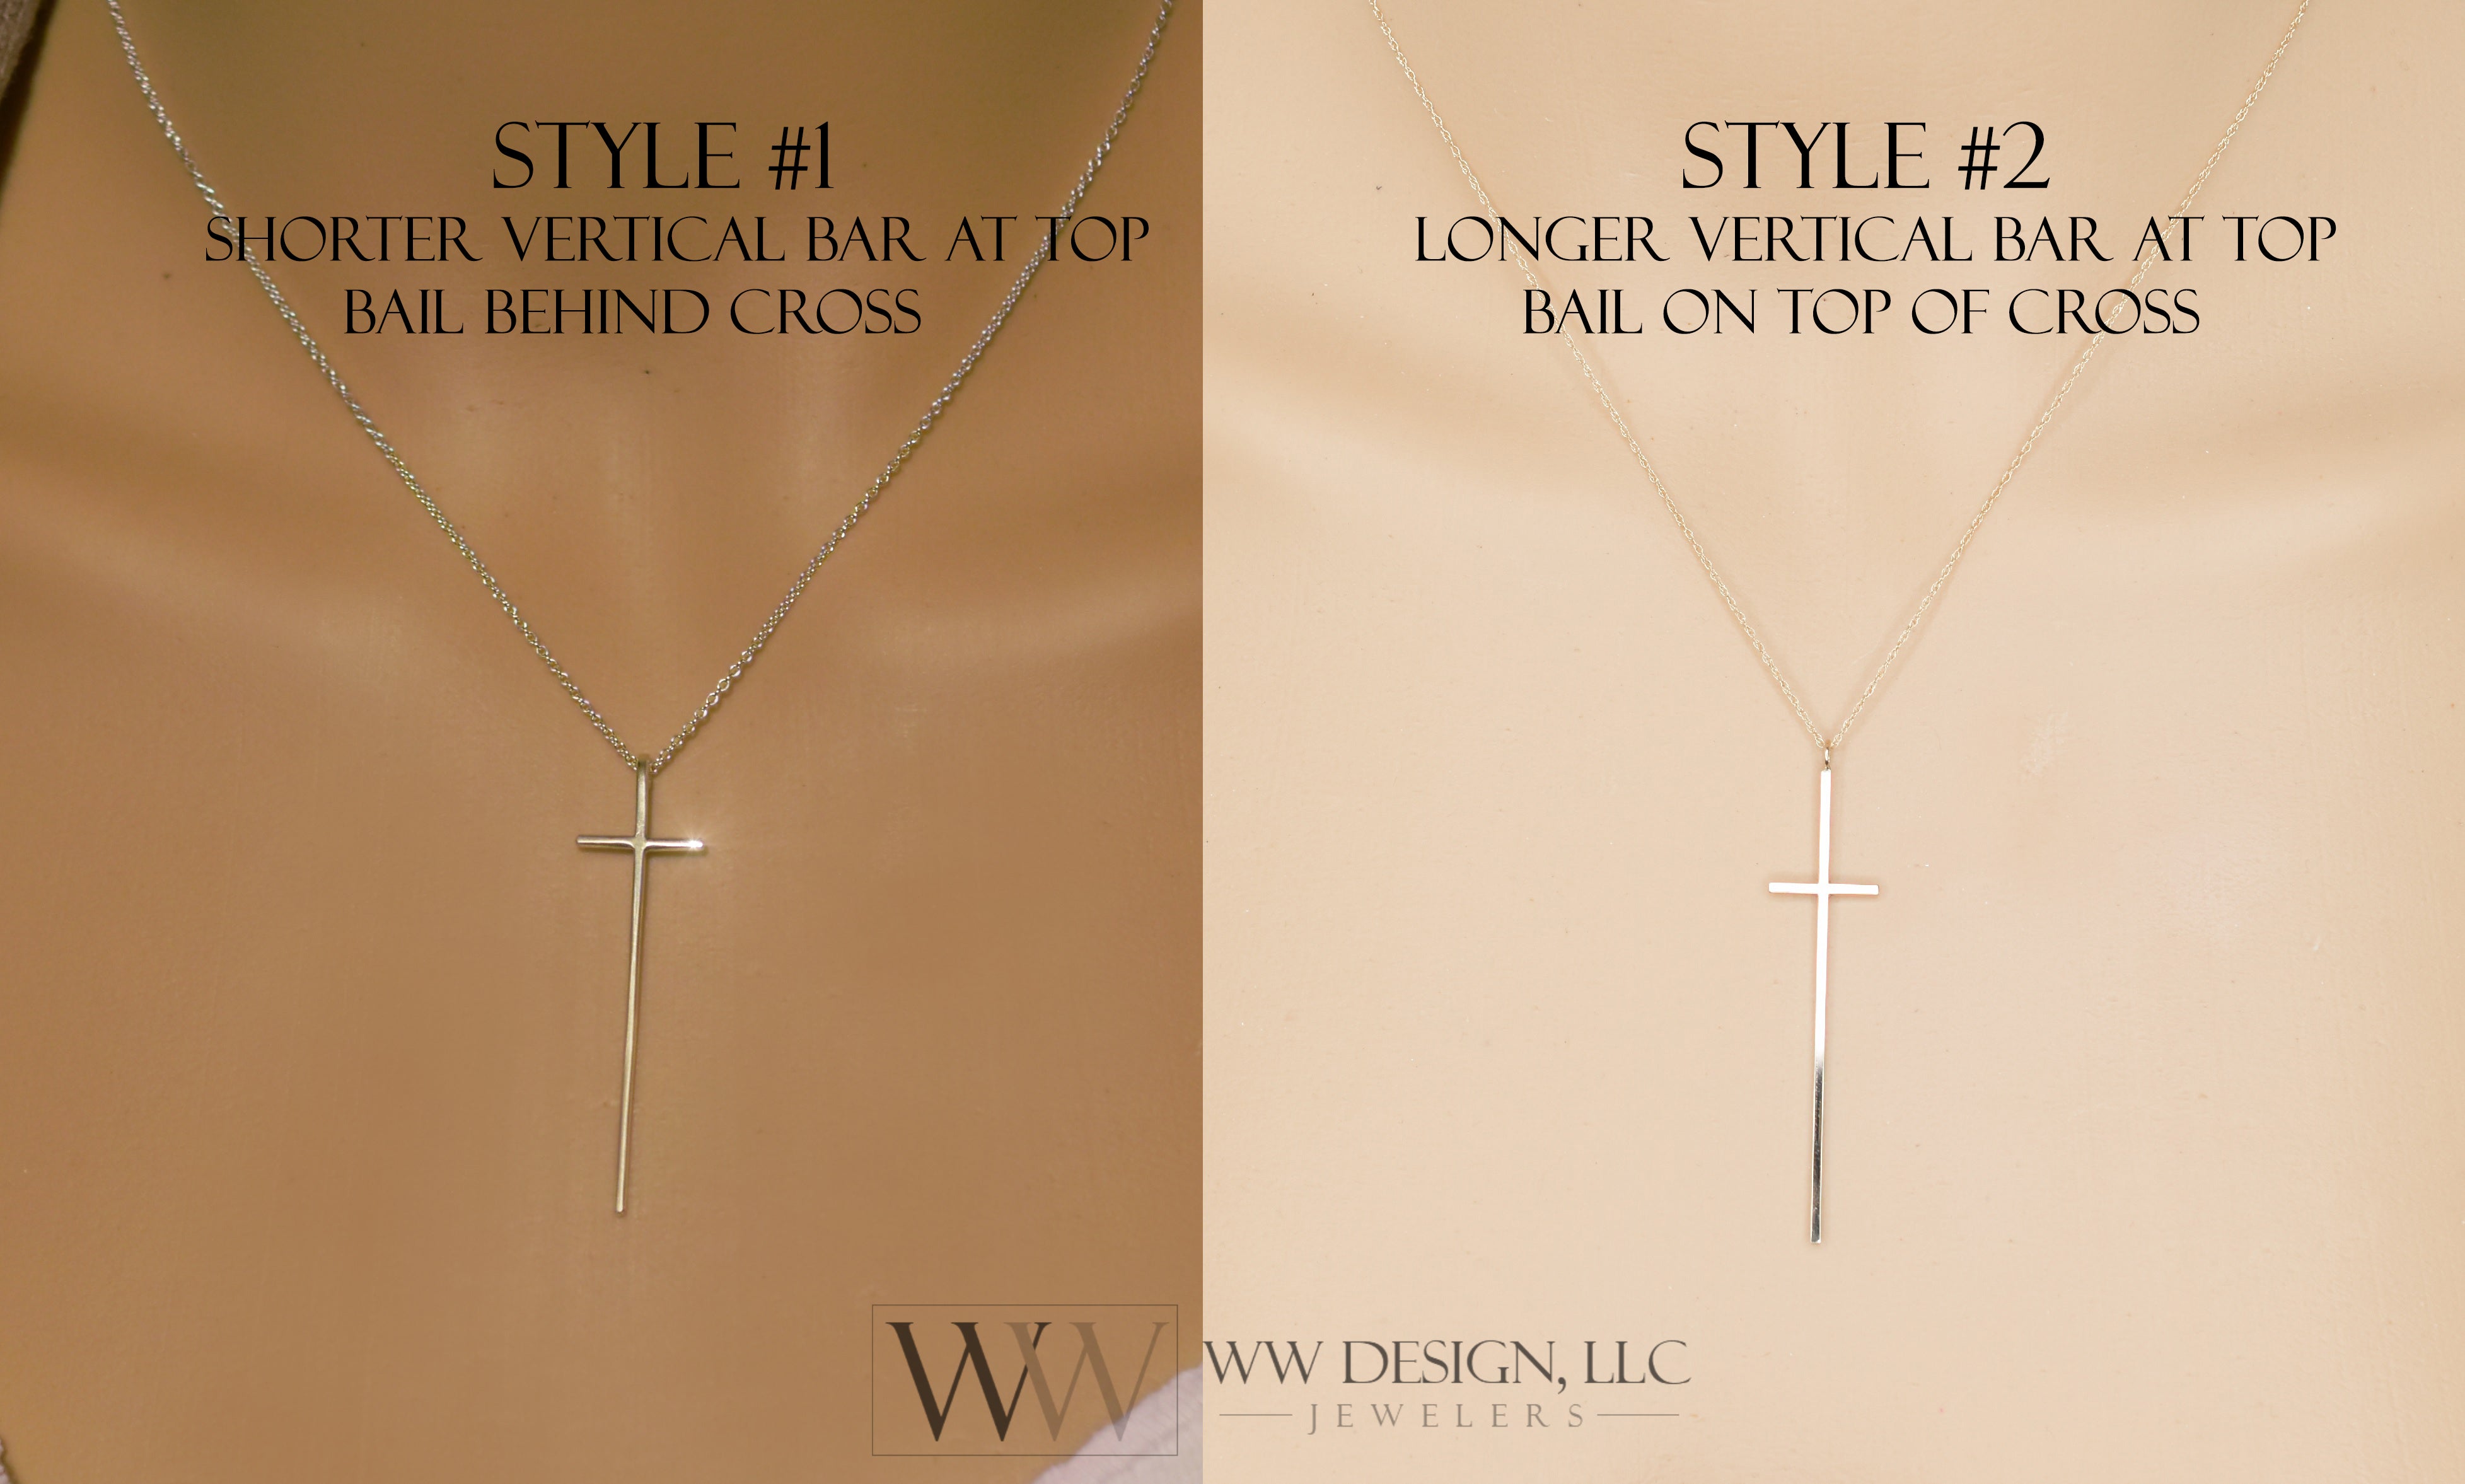 Minimalist Long CROSS Necklace - Customize- Sterling Silver or 14k Solid Gold (Yellow, White or Rose) - Celebrity Style of Nene Leakes RHOA, KTG Kathy Lee Gifford, Chenoweth, Kathie Lee Gifford